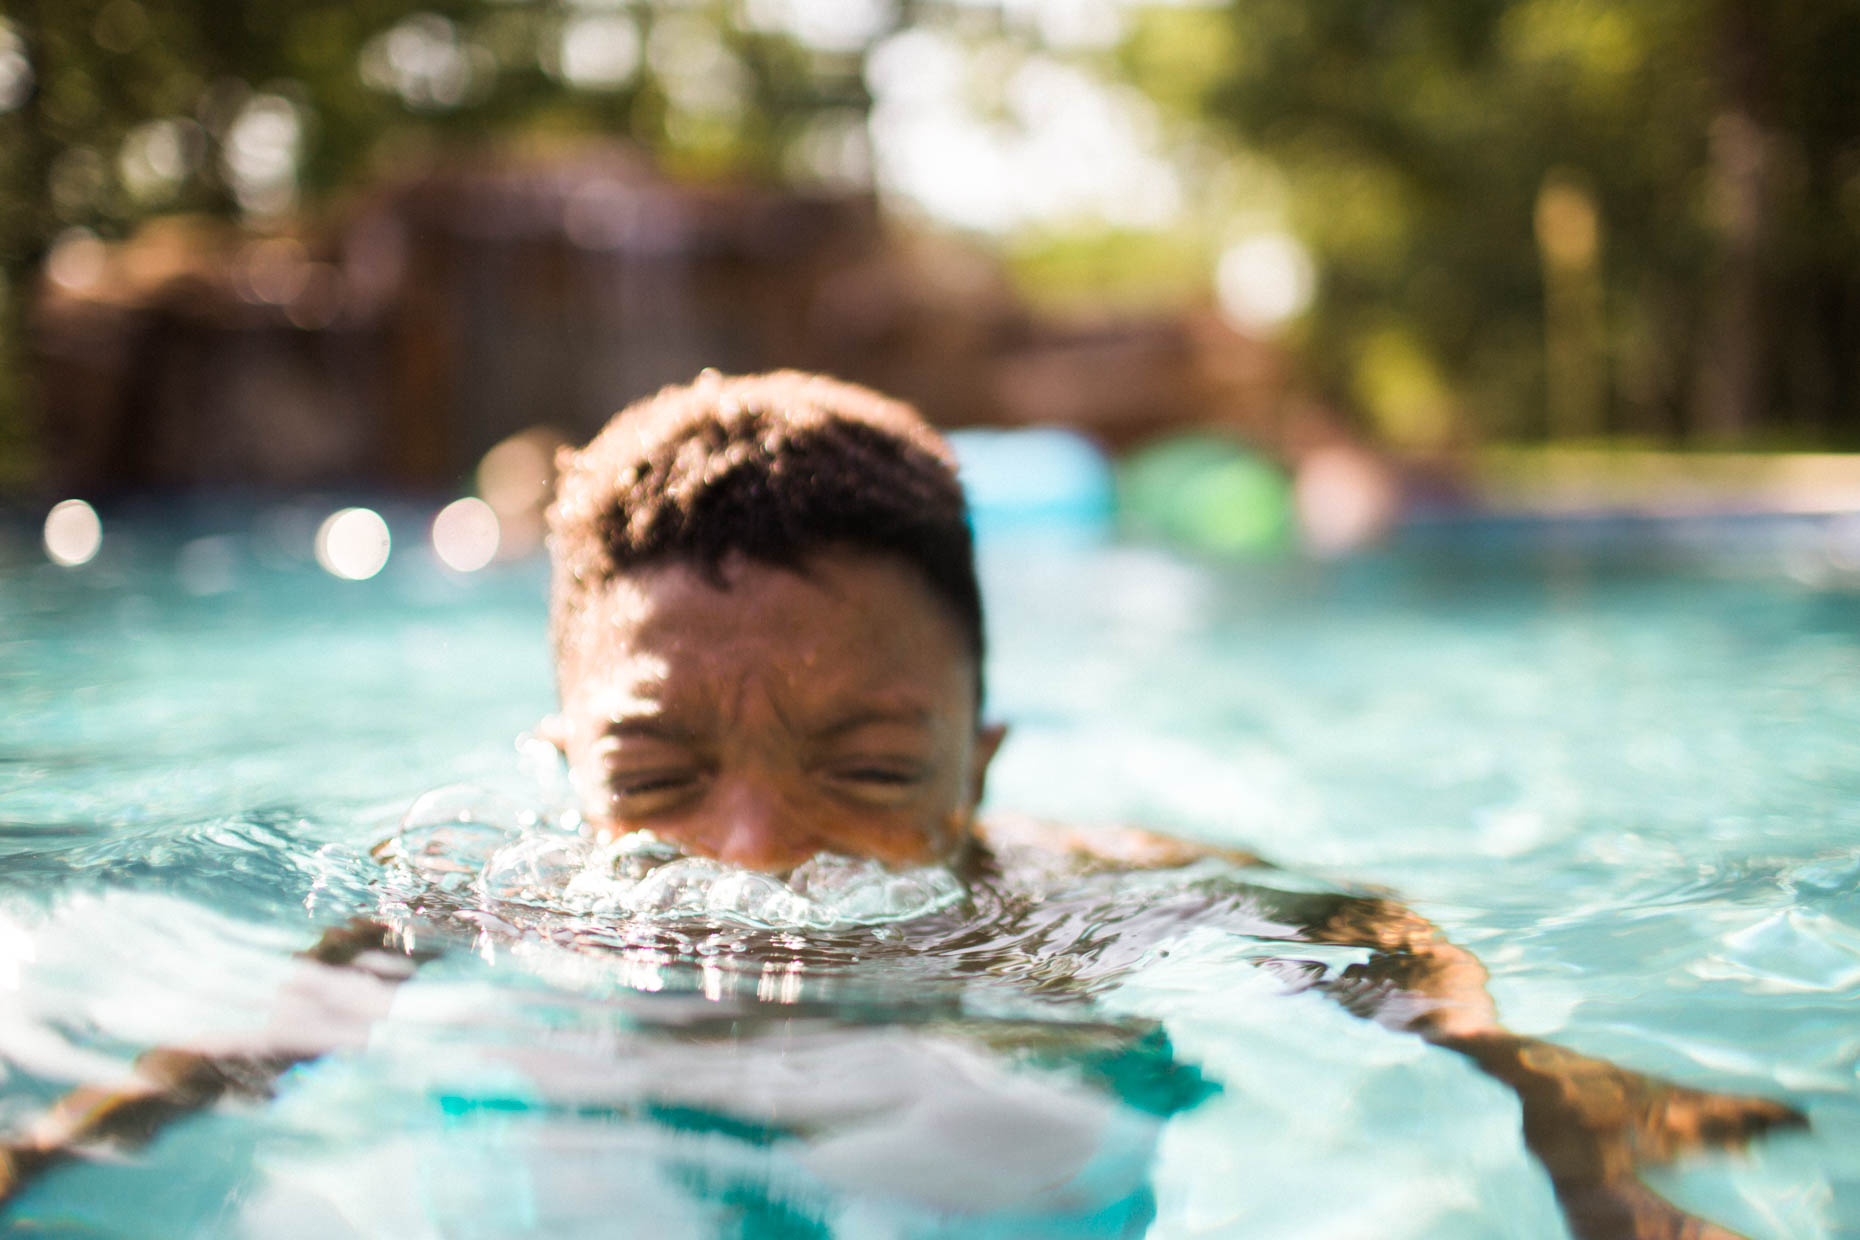 Young black boy submerged in a swimming pool blowing bubbles out of mouth